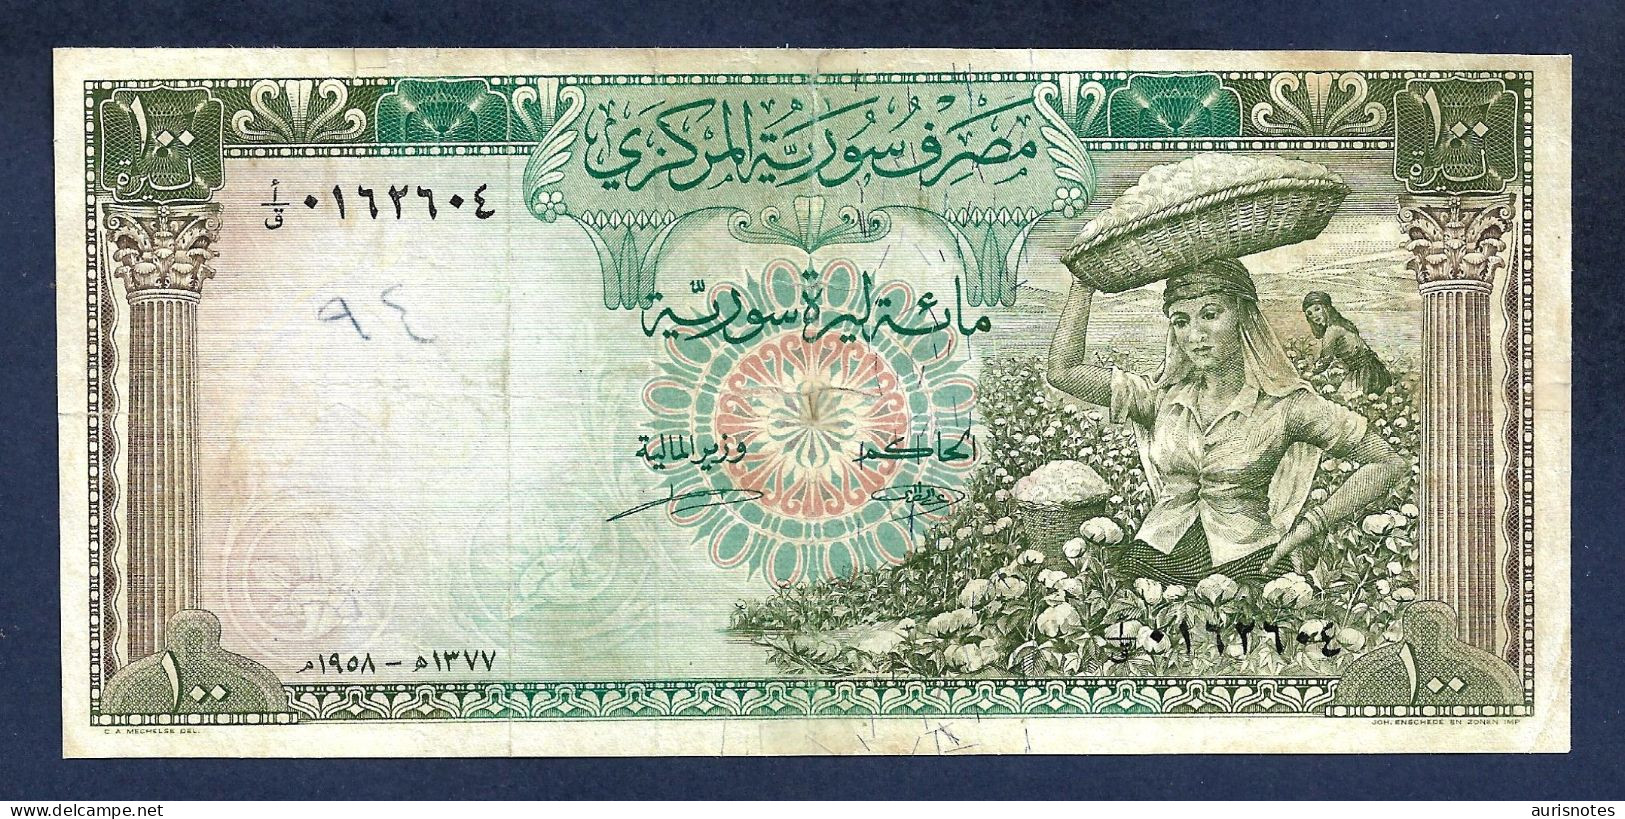 Syria 100 Pounds 1958 P91a First Issue Scarce Fine/VF - Syria